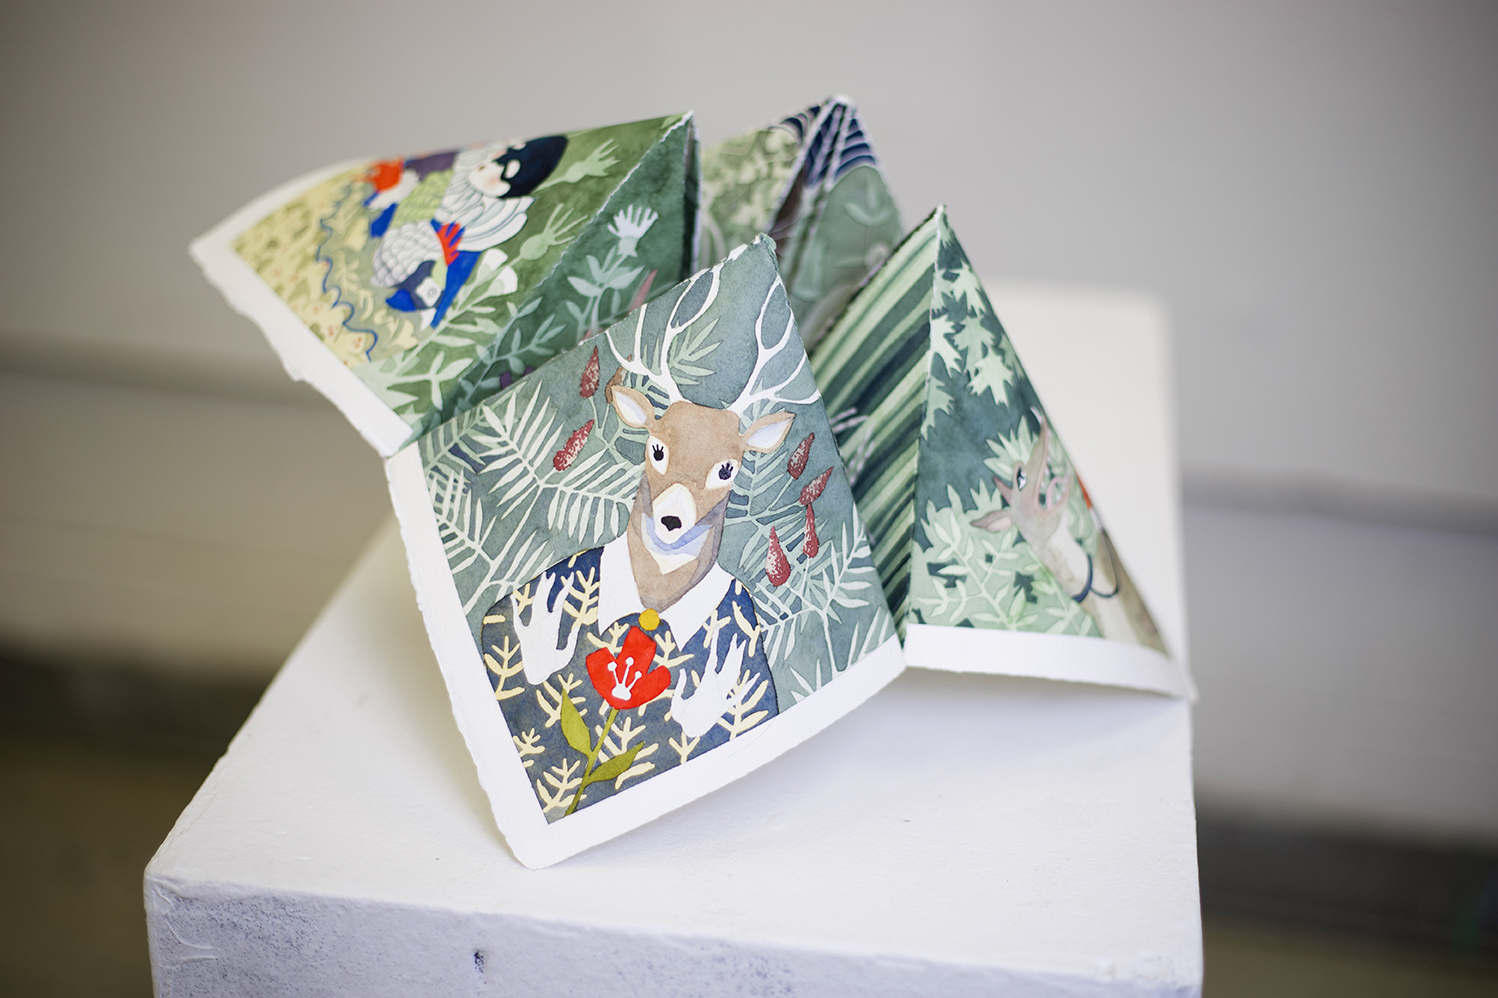 Photo of a paper cootie catcher with animals and scenes depicted on each of its corners.